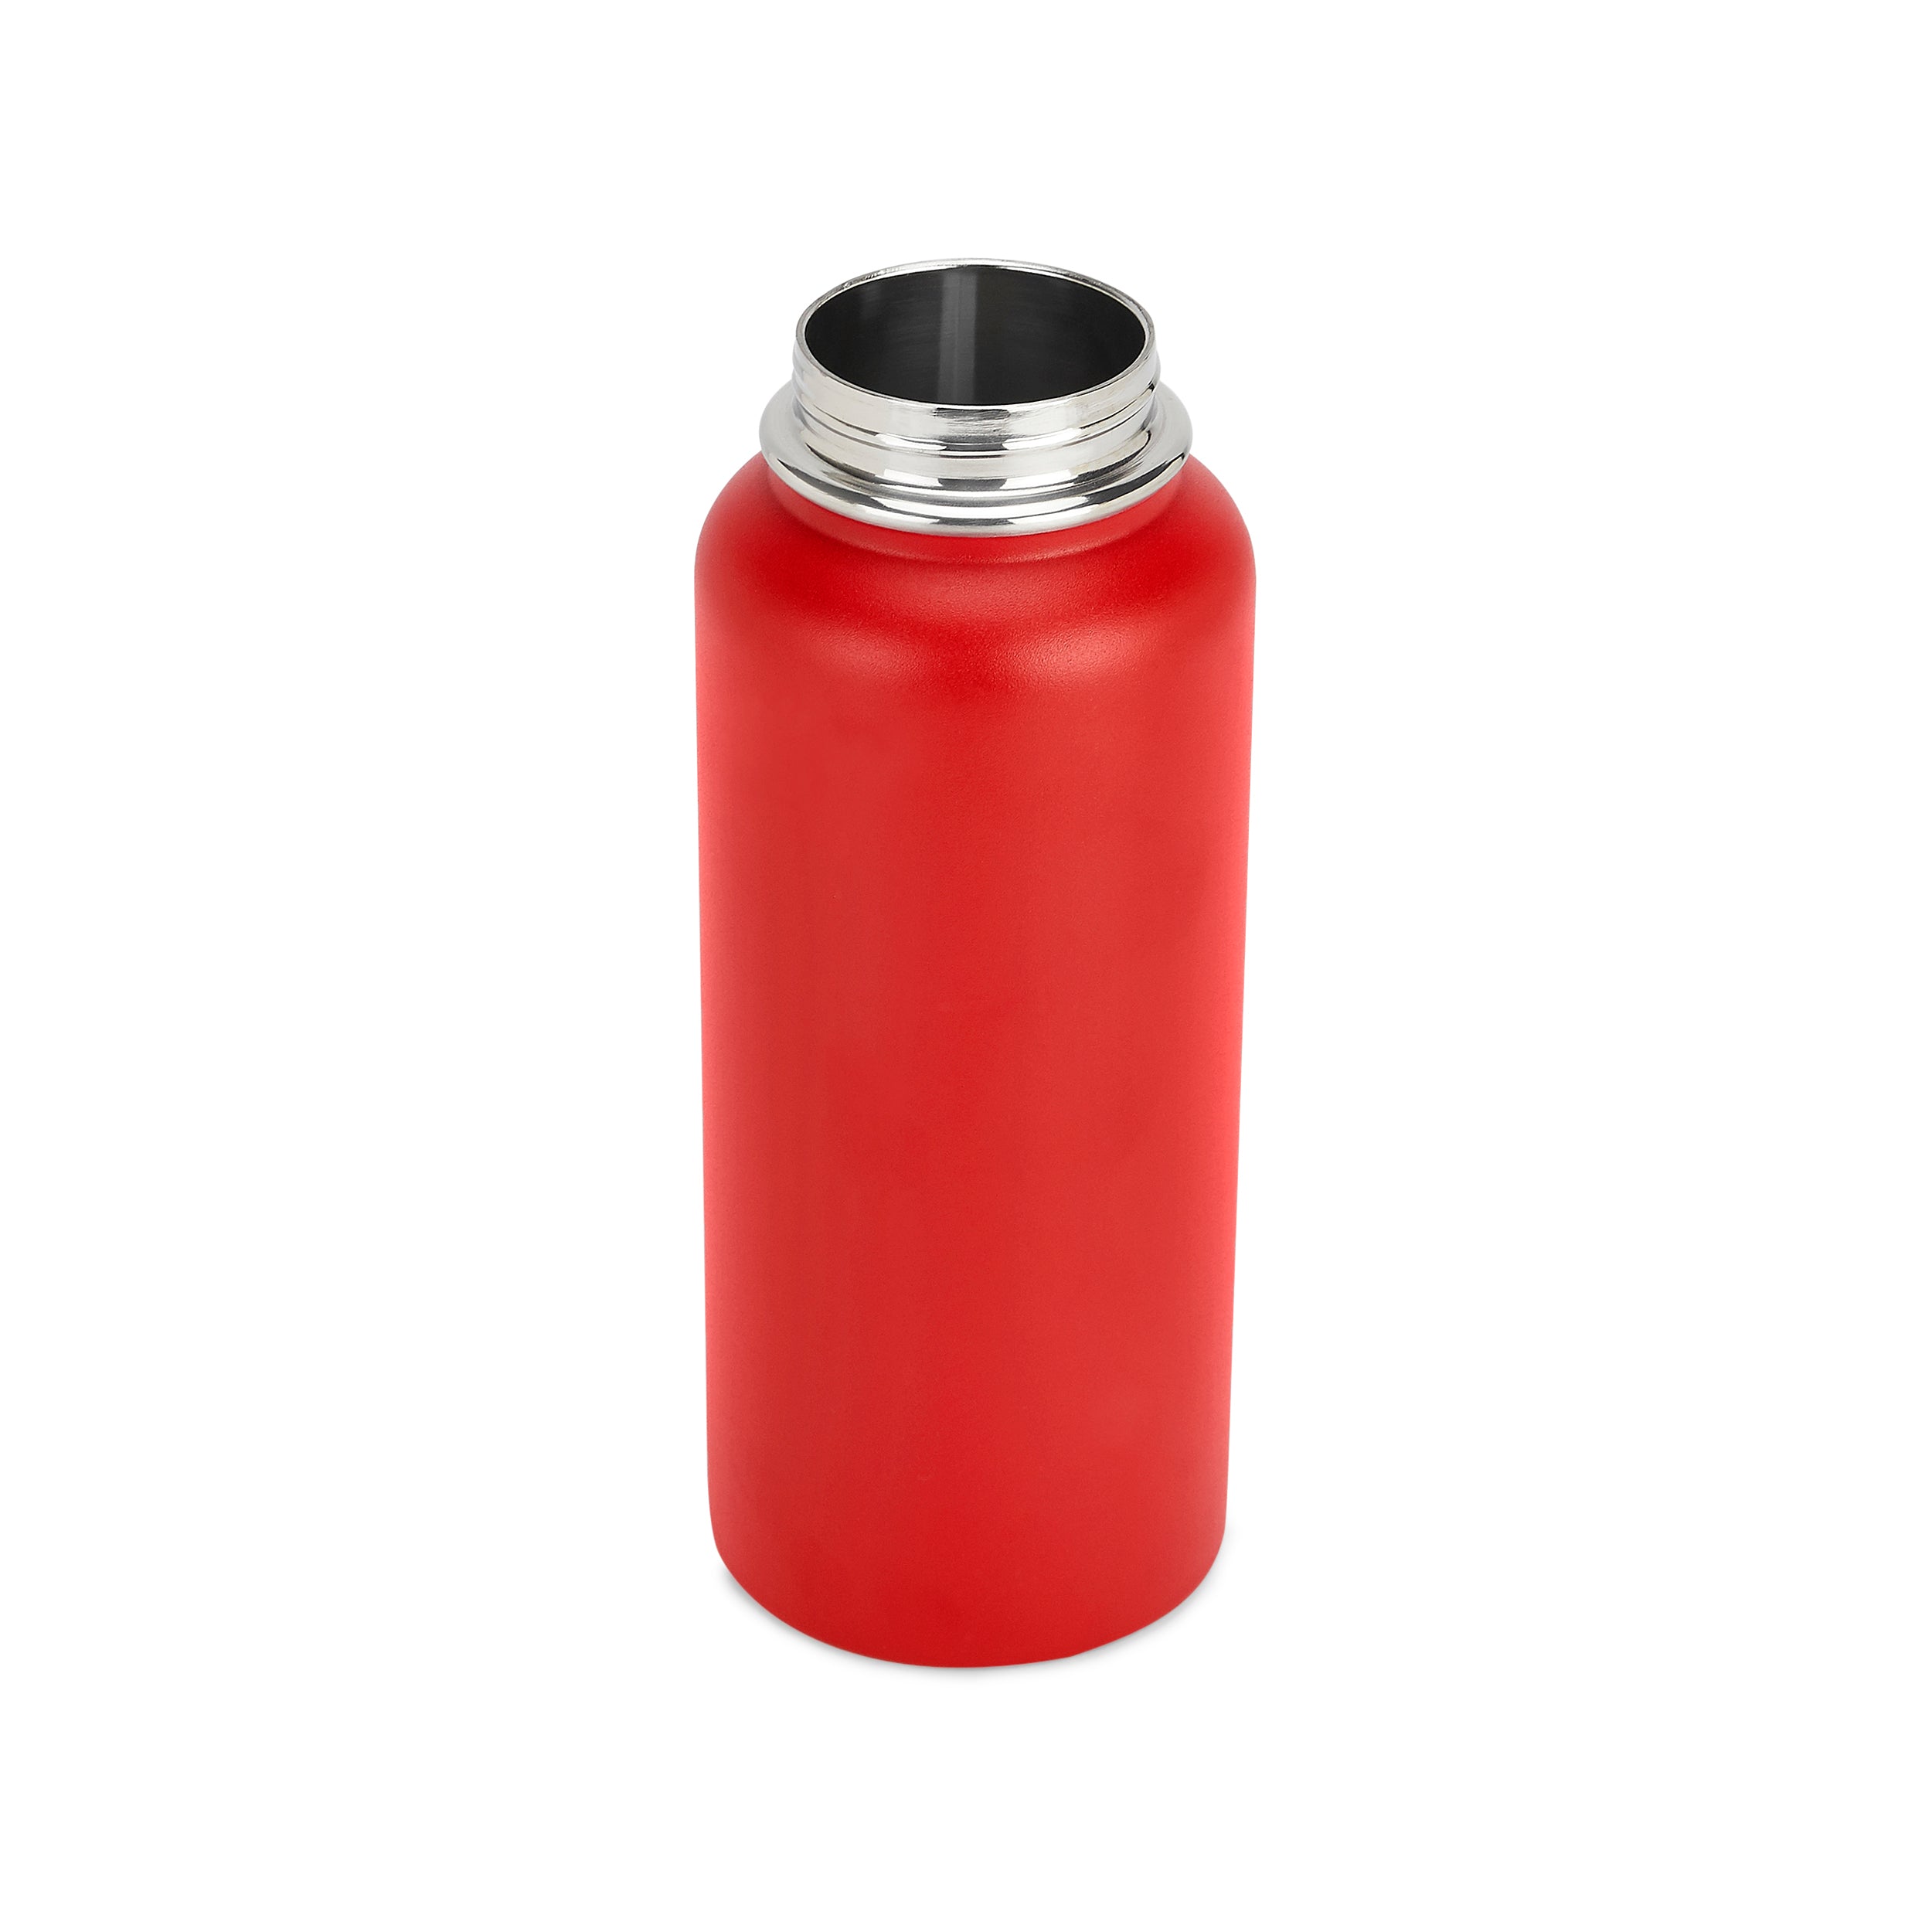 32oz Hydro Water Bottle for Golf